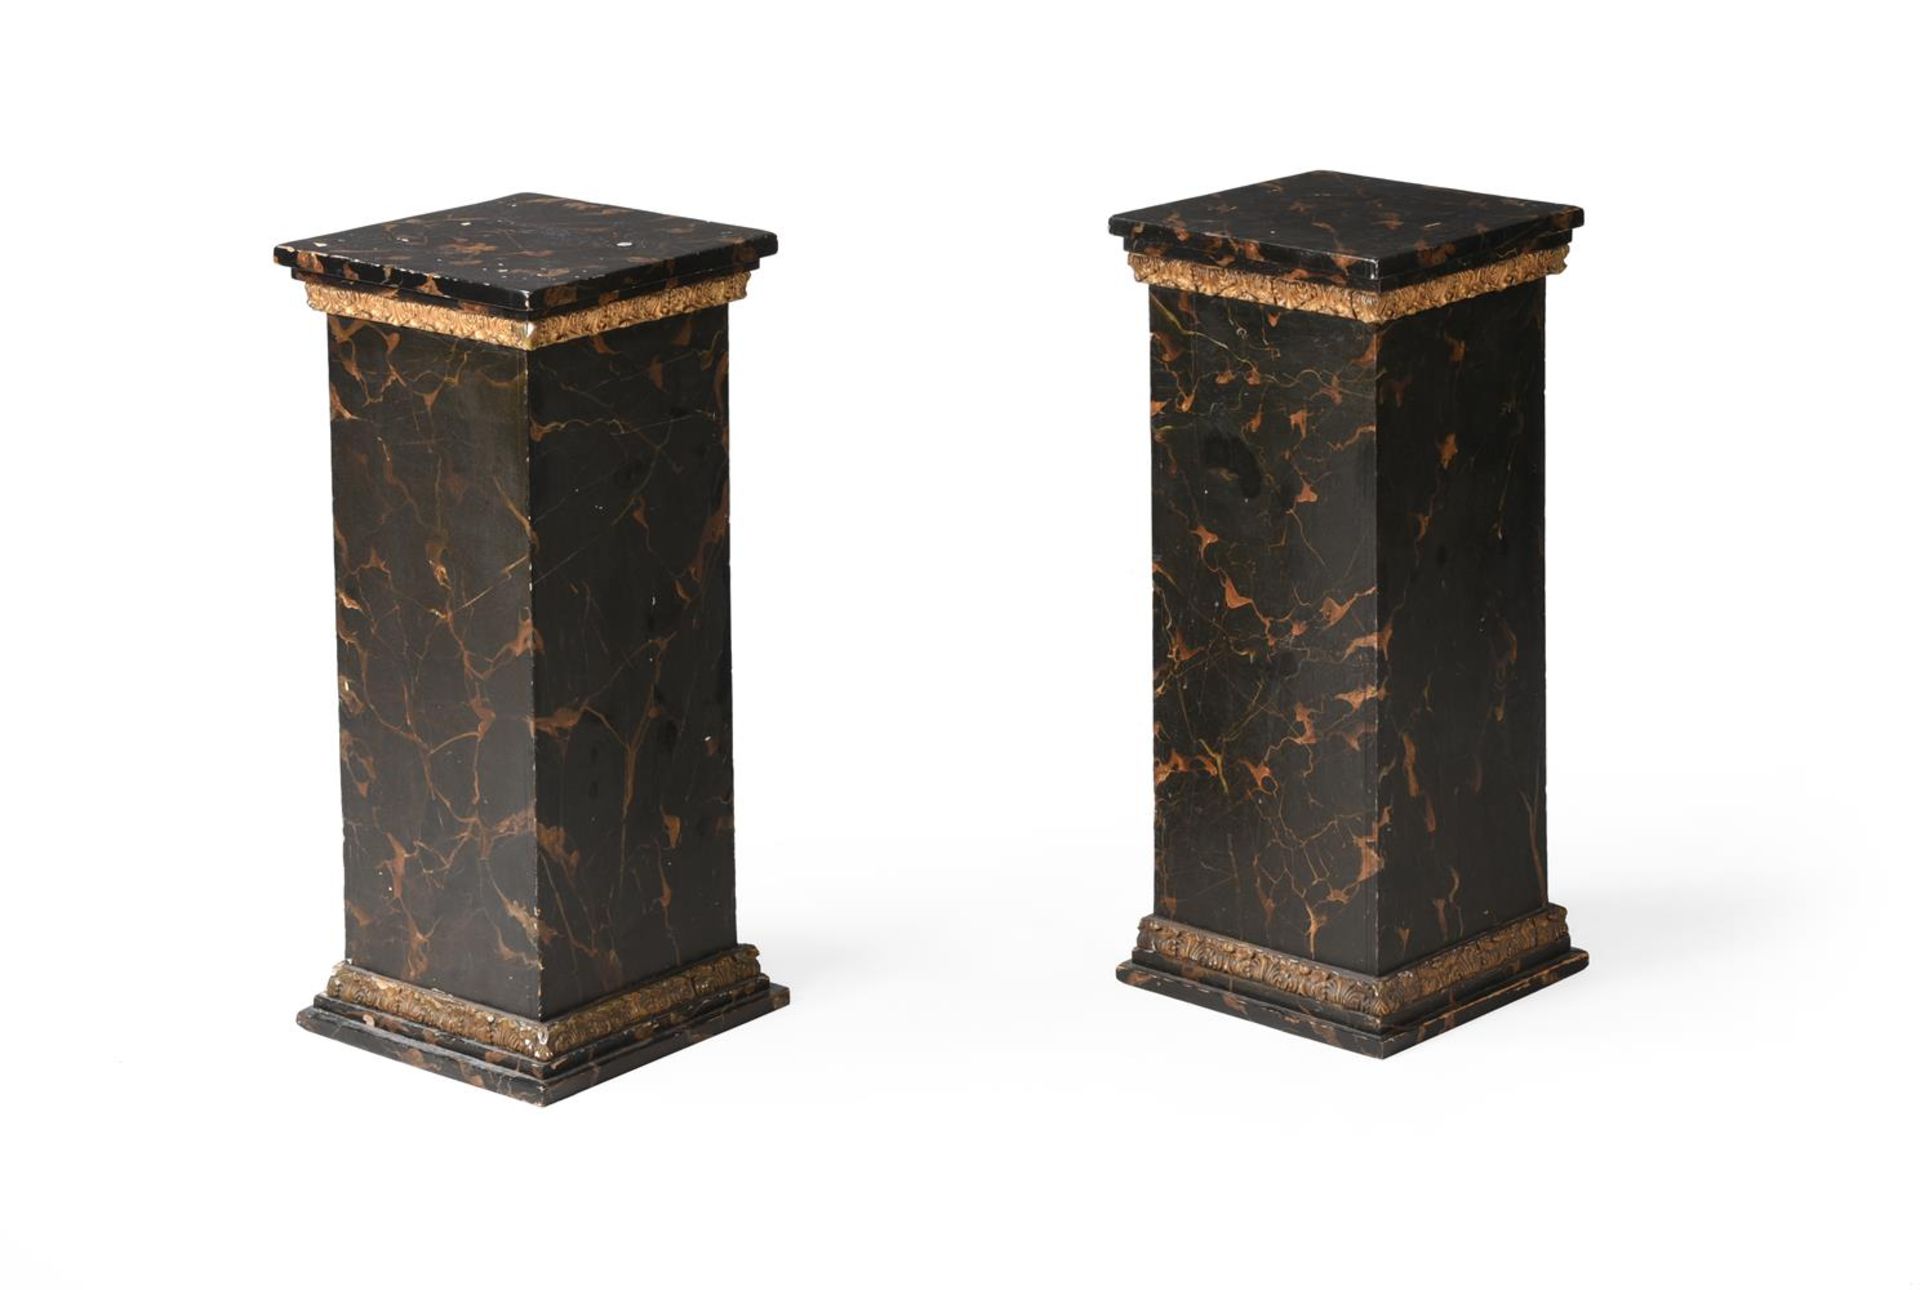 A PAIR OF WOOD PEDESTALS PAINTED TO SIMULATE MARBLE, LATE 19TH/EARLY 20TH CENTURY